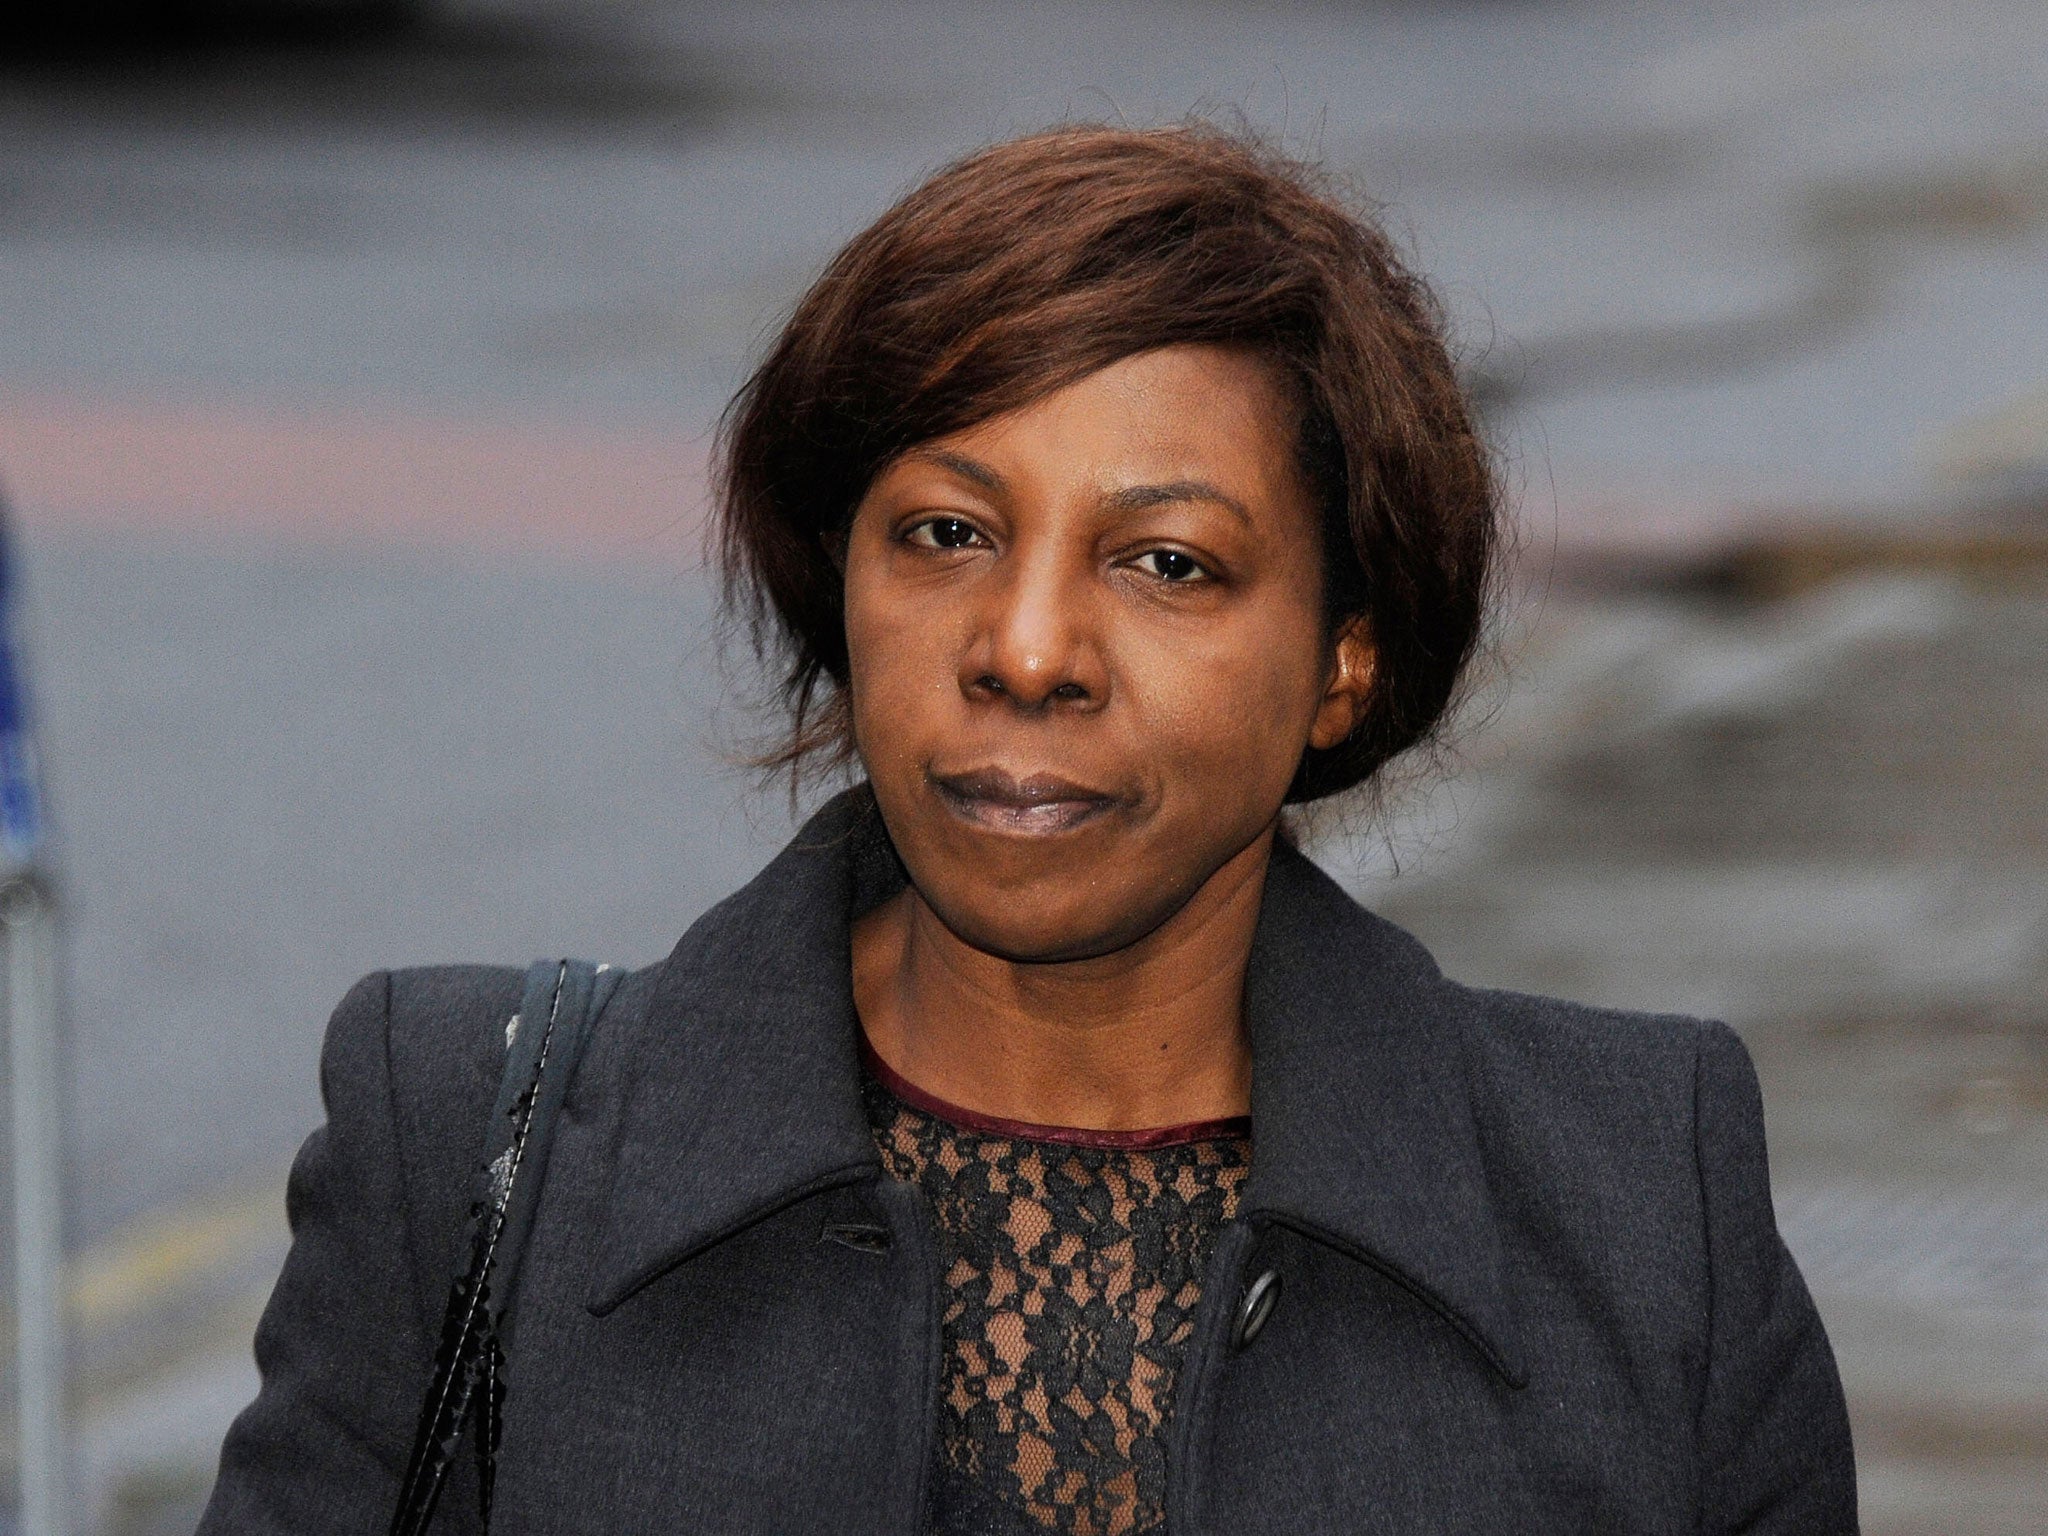 Constance Briscoe, a part-time judge, was a neighbour and friend of Huhne’s ex-wife Pryce